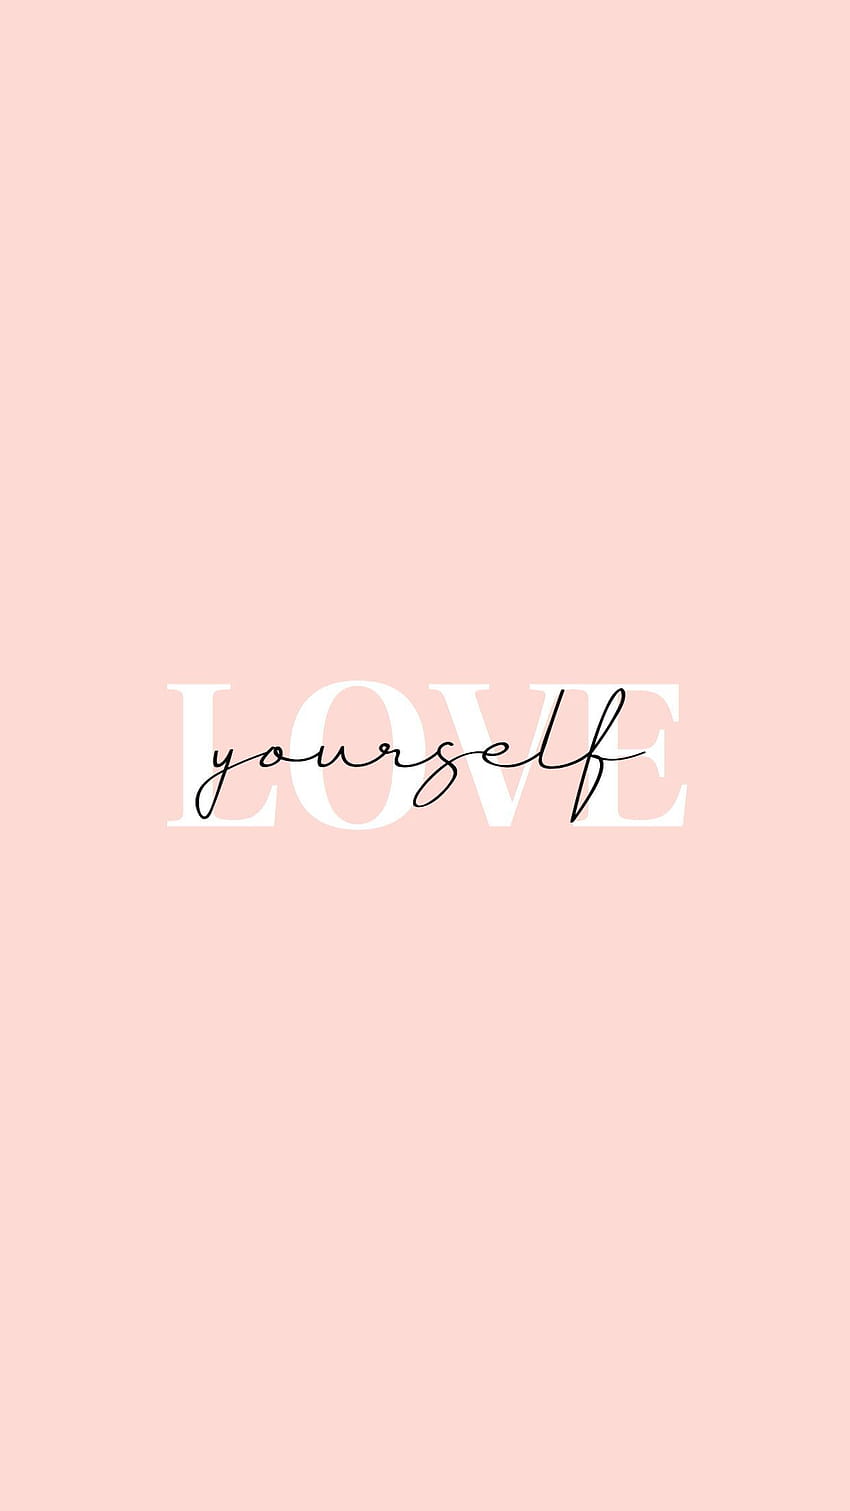 Love yourself, aesthetic quote pink HD phone wallpaper